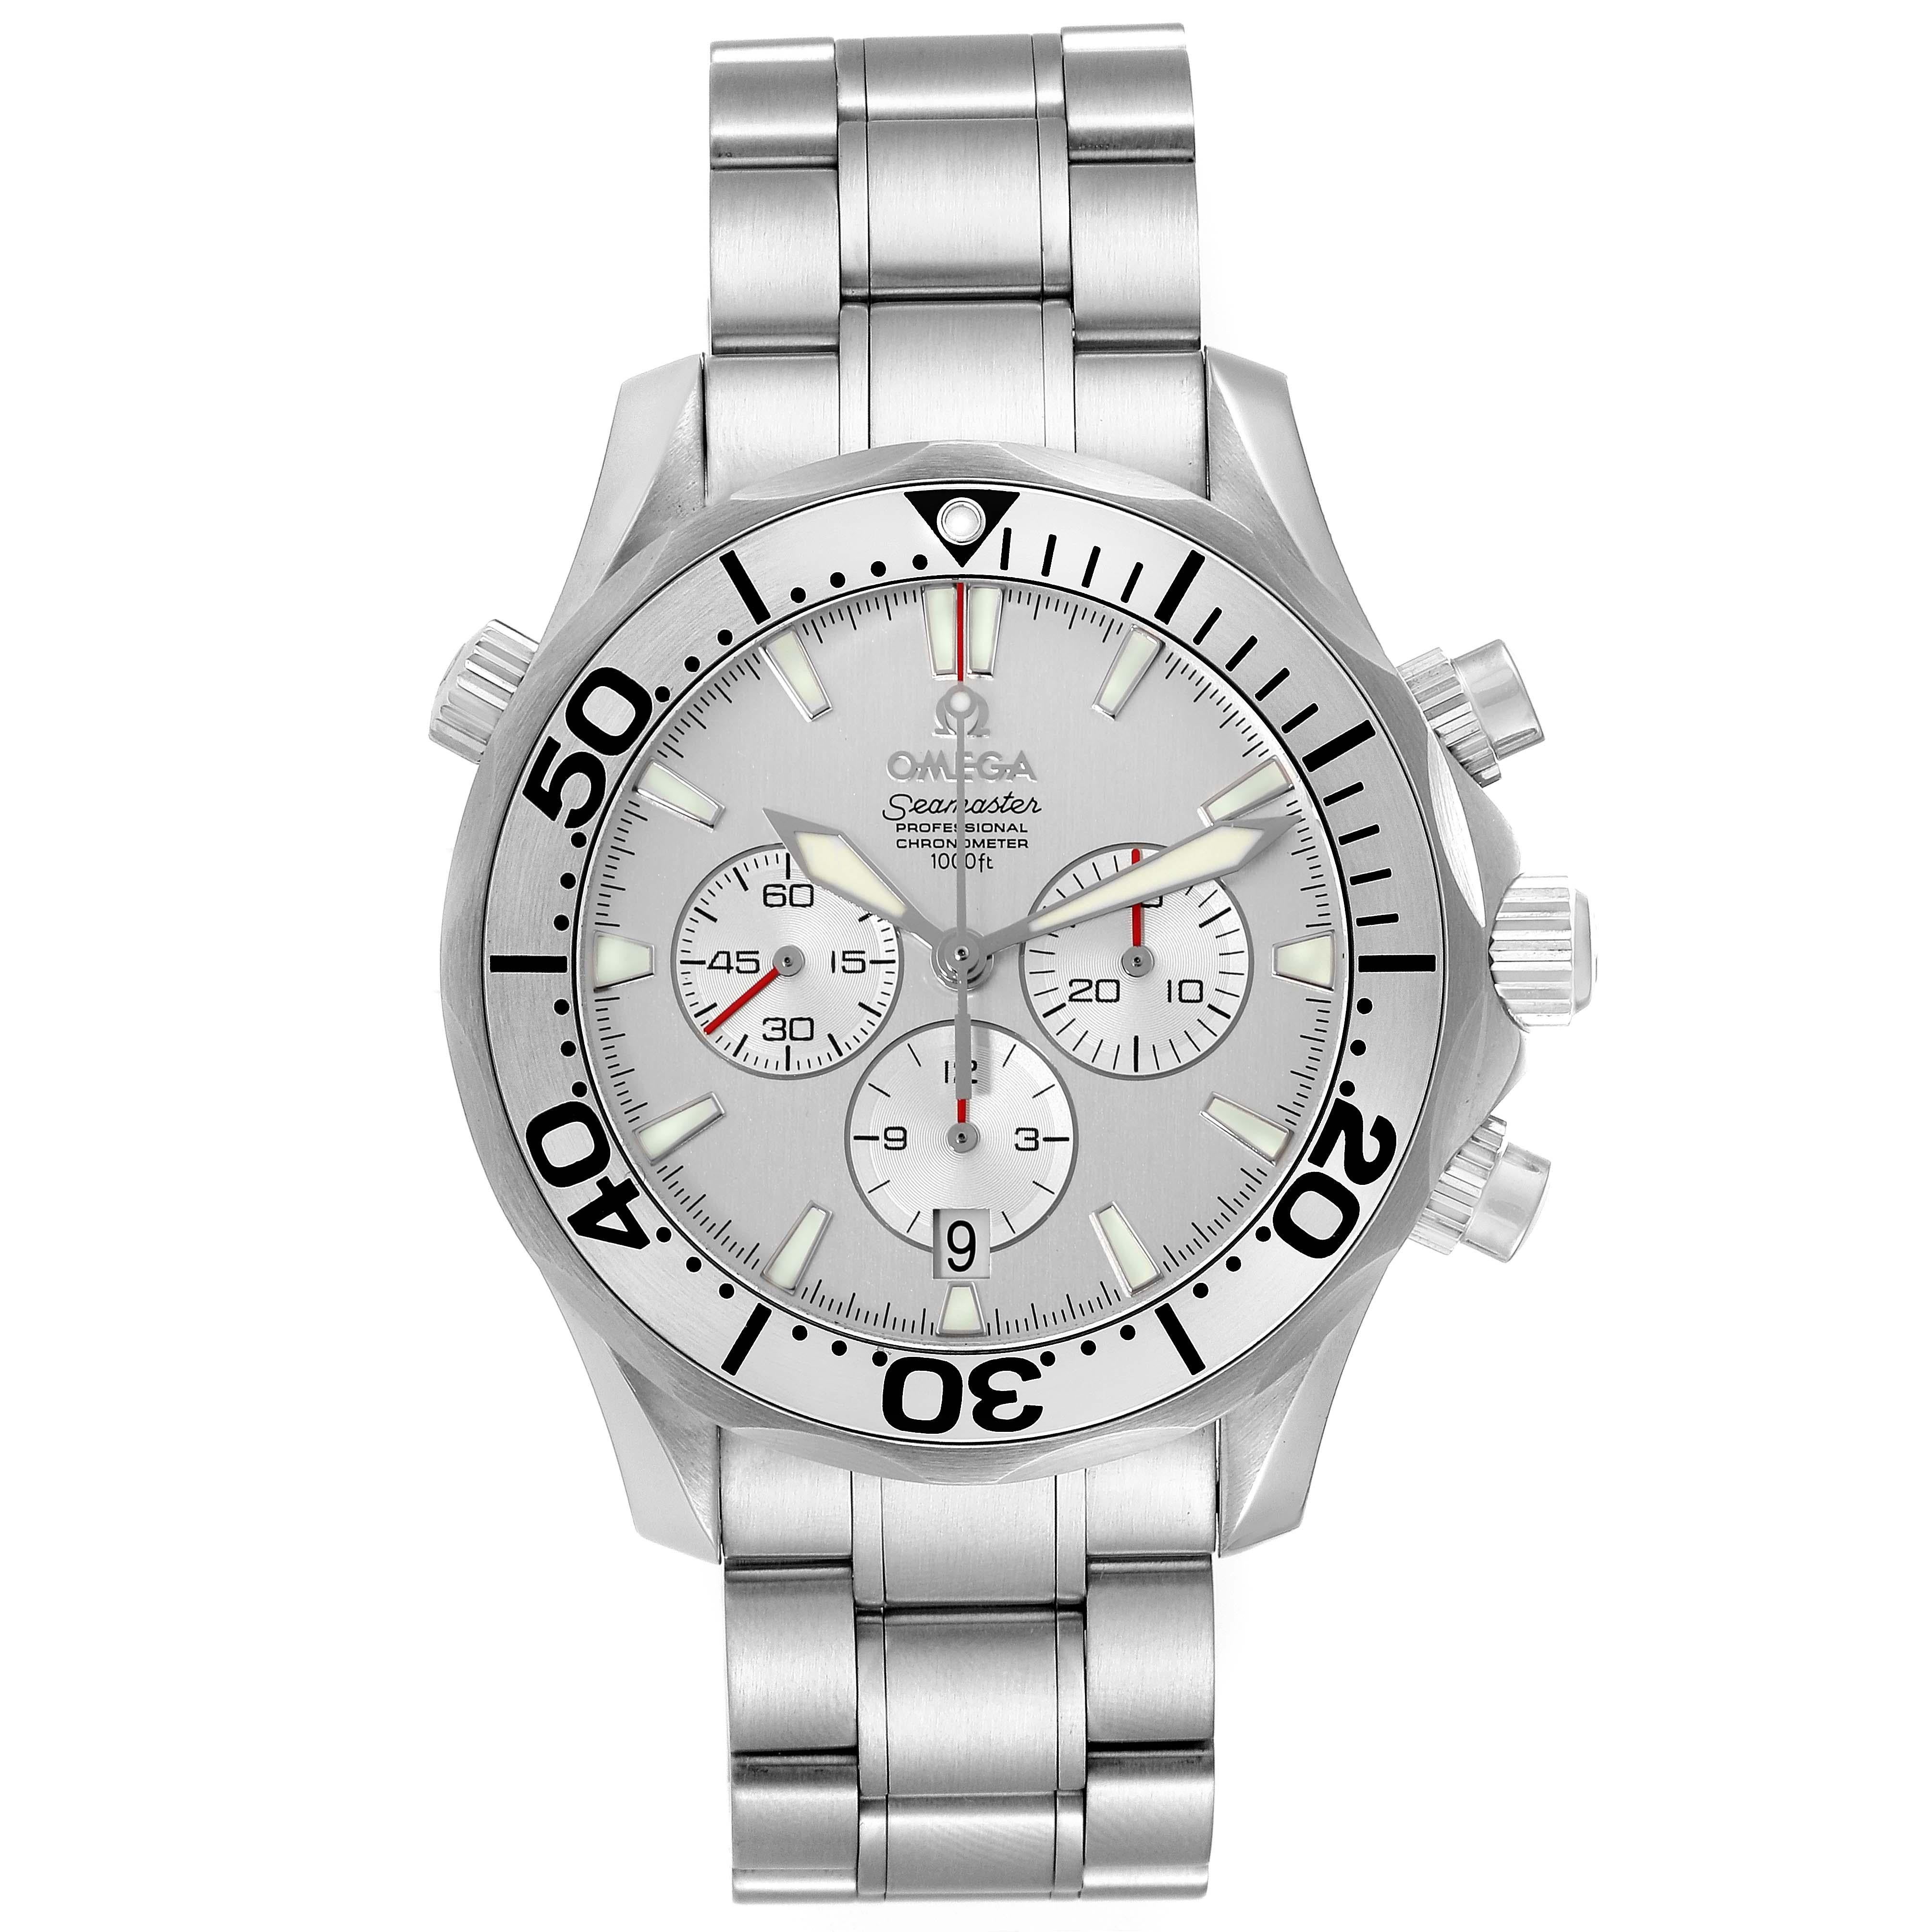 Omega Seamaster Special Edition Chronograph Watch 2589.30.00 Box Card. Officially certified chronometer automatic self-winding movement. Chronograph function. Brushed and polished stainless steel case 41.5 mm in diameter. Omega logo on crown.